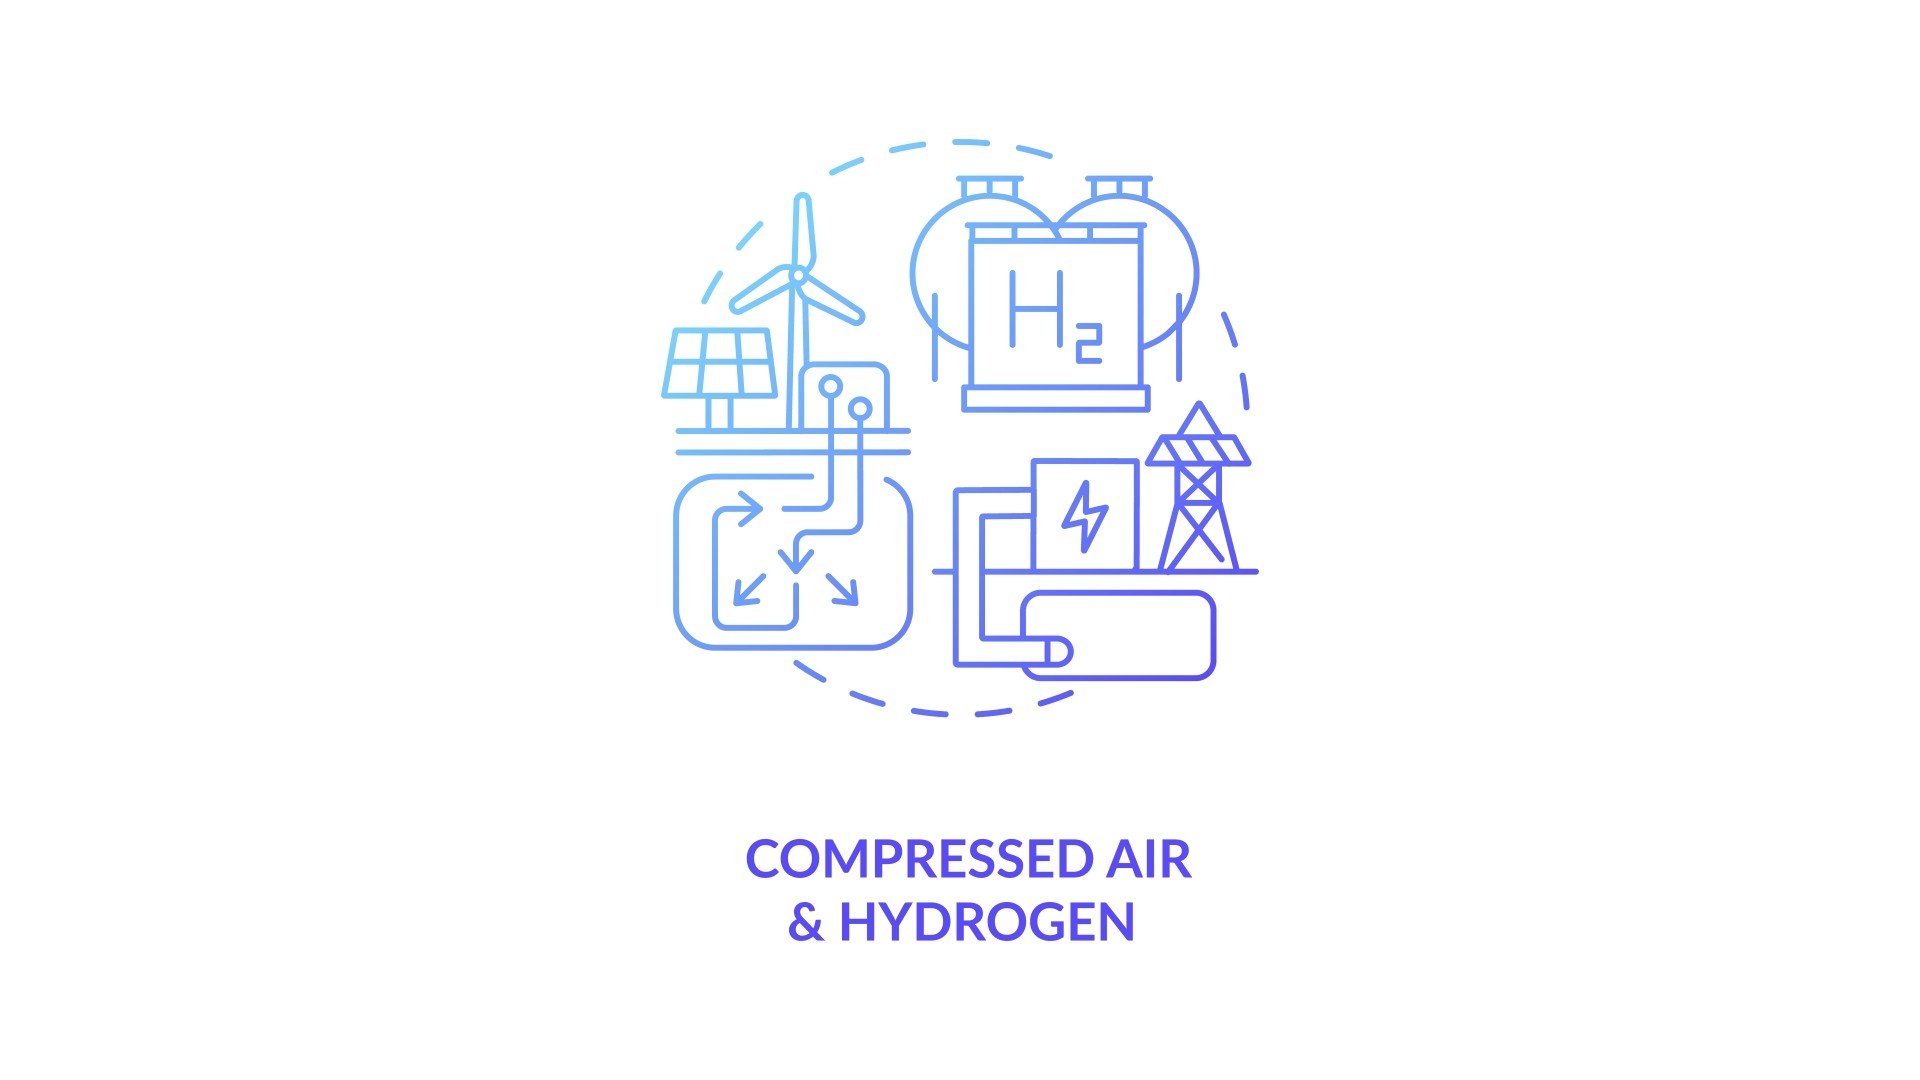 Concept illustration of compressed air and hydrogen energy storage.